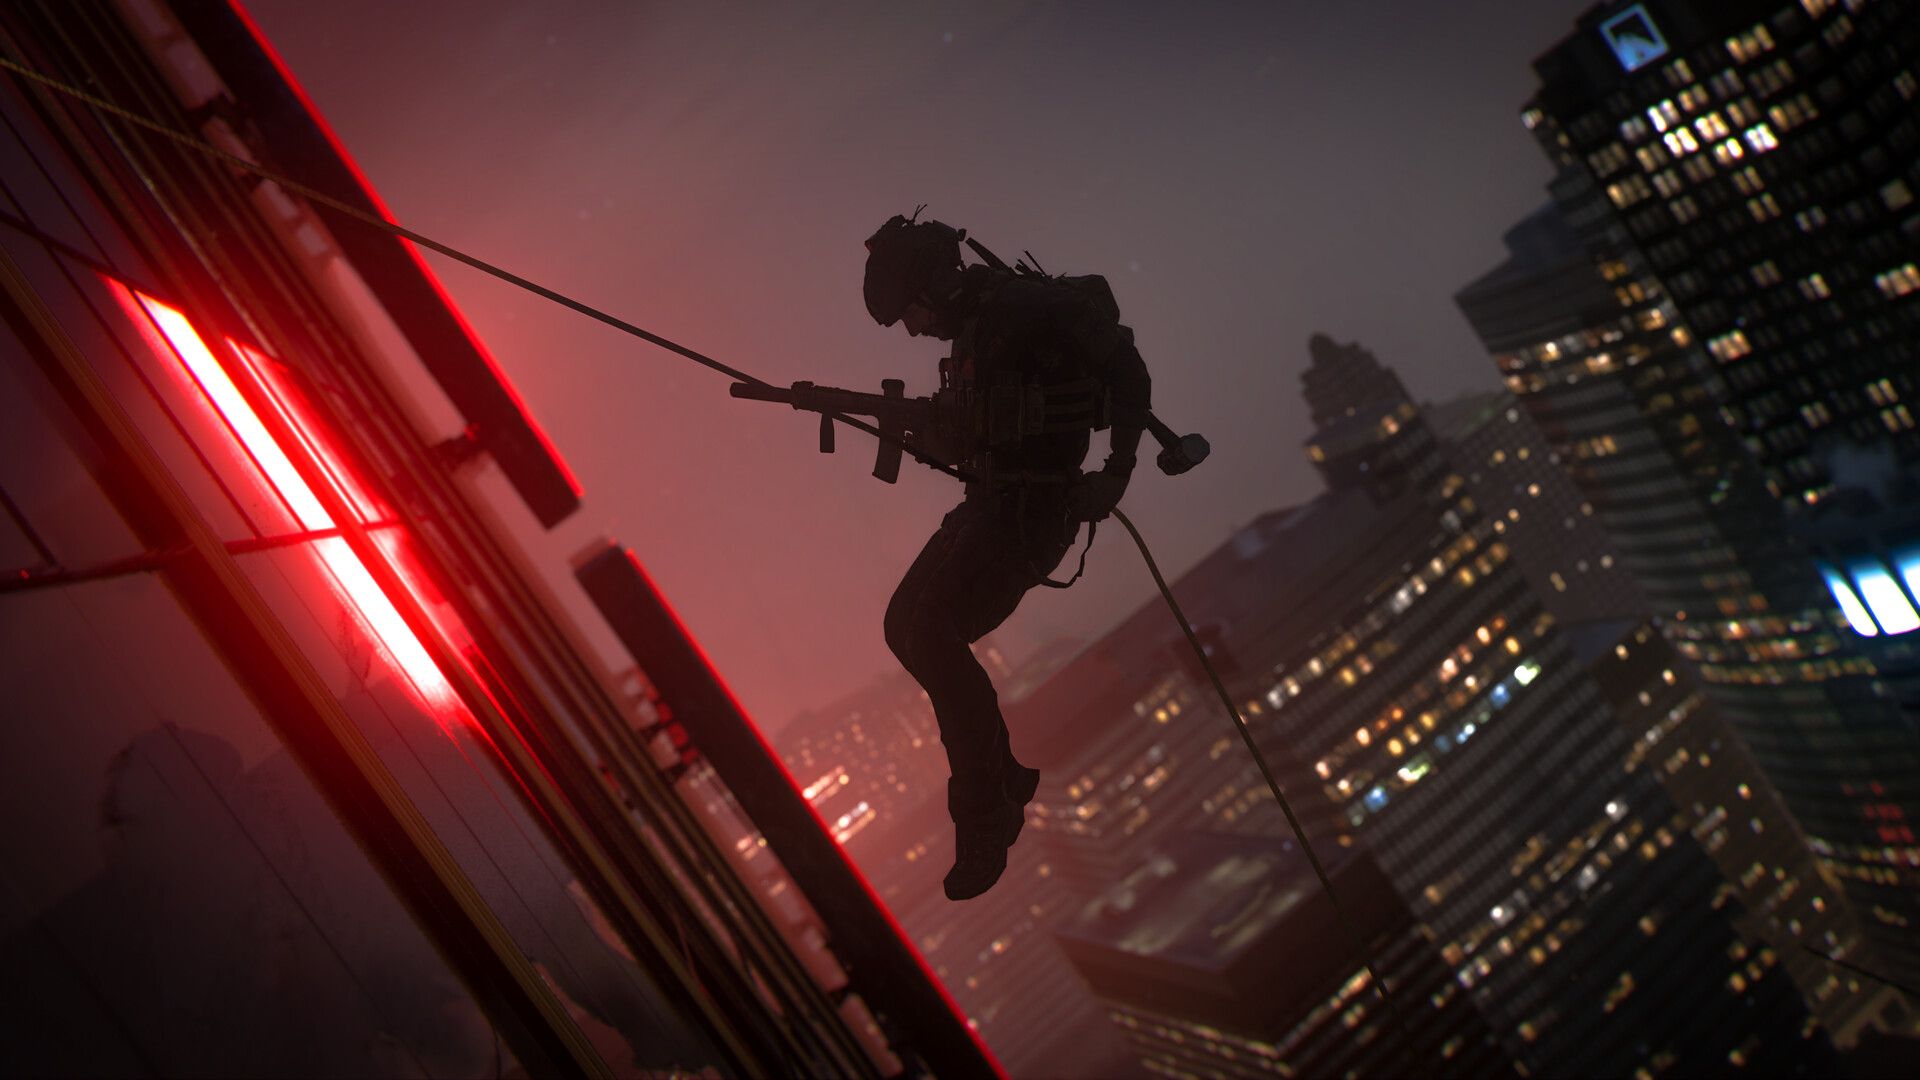 Video game screenshot of a soldier rappelling down a skyscraper at night